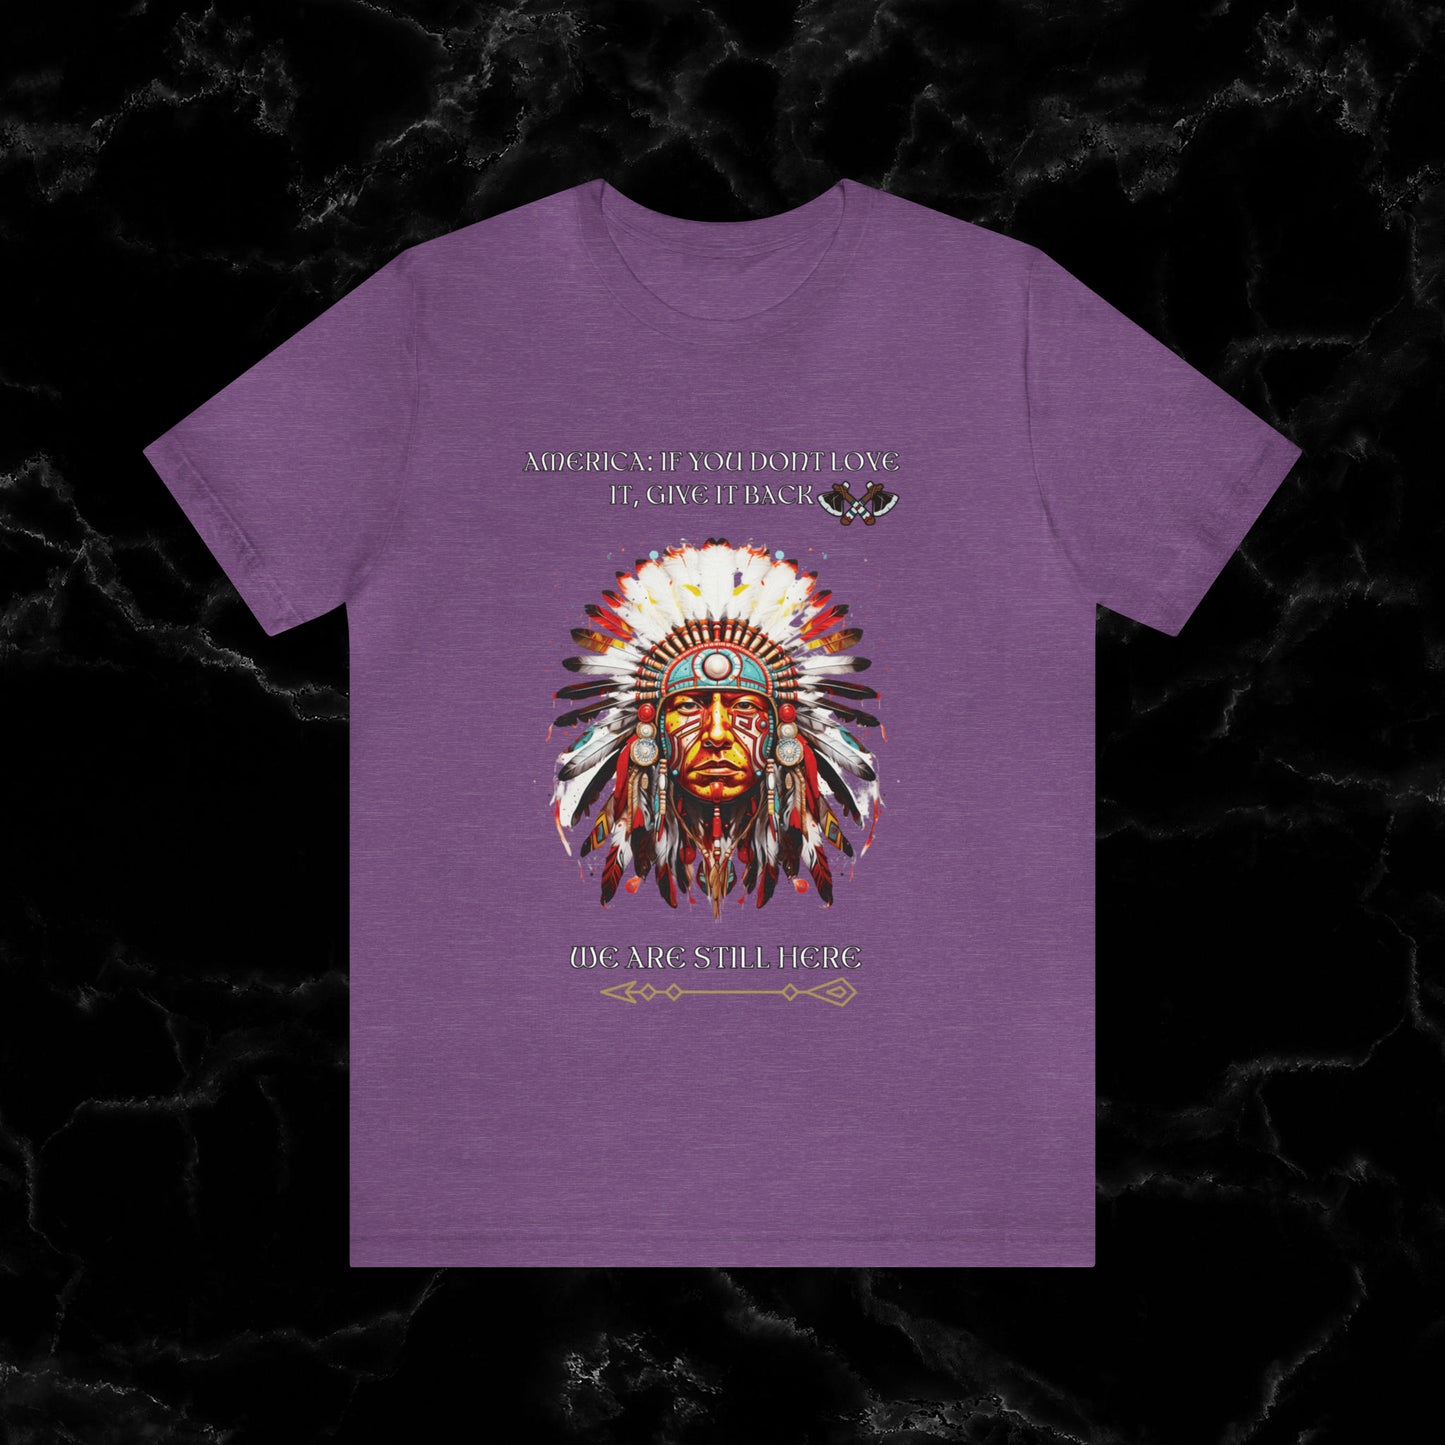 America Love it Or Give It Back Vintage T-Shirt - Indigenous Native Shirt T-Shirt Heather Team Purple S 